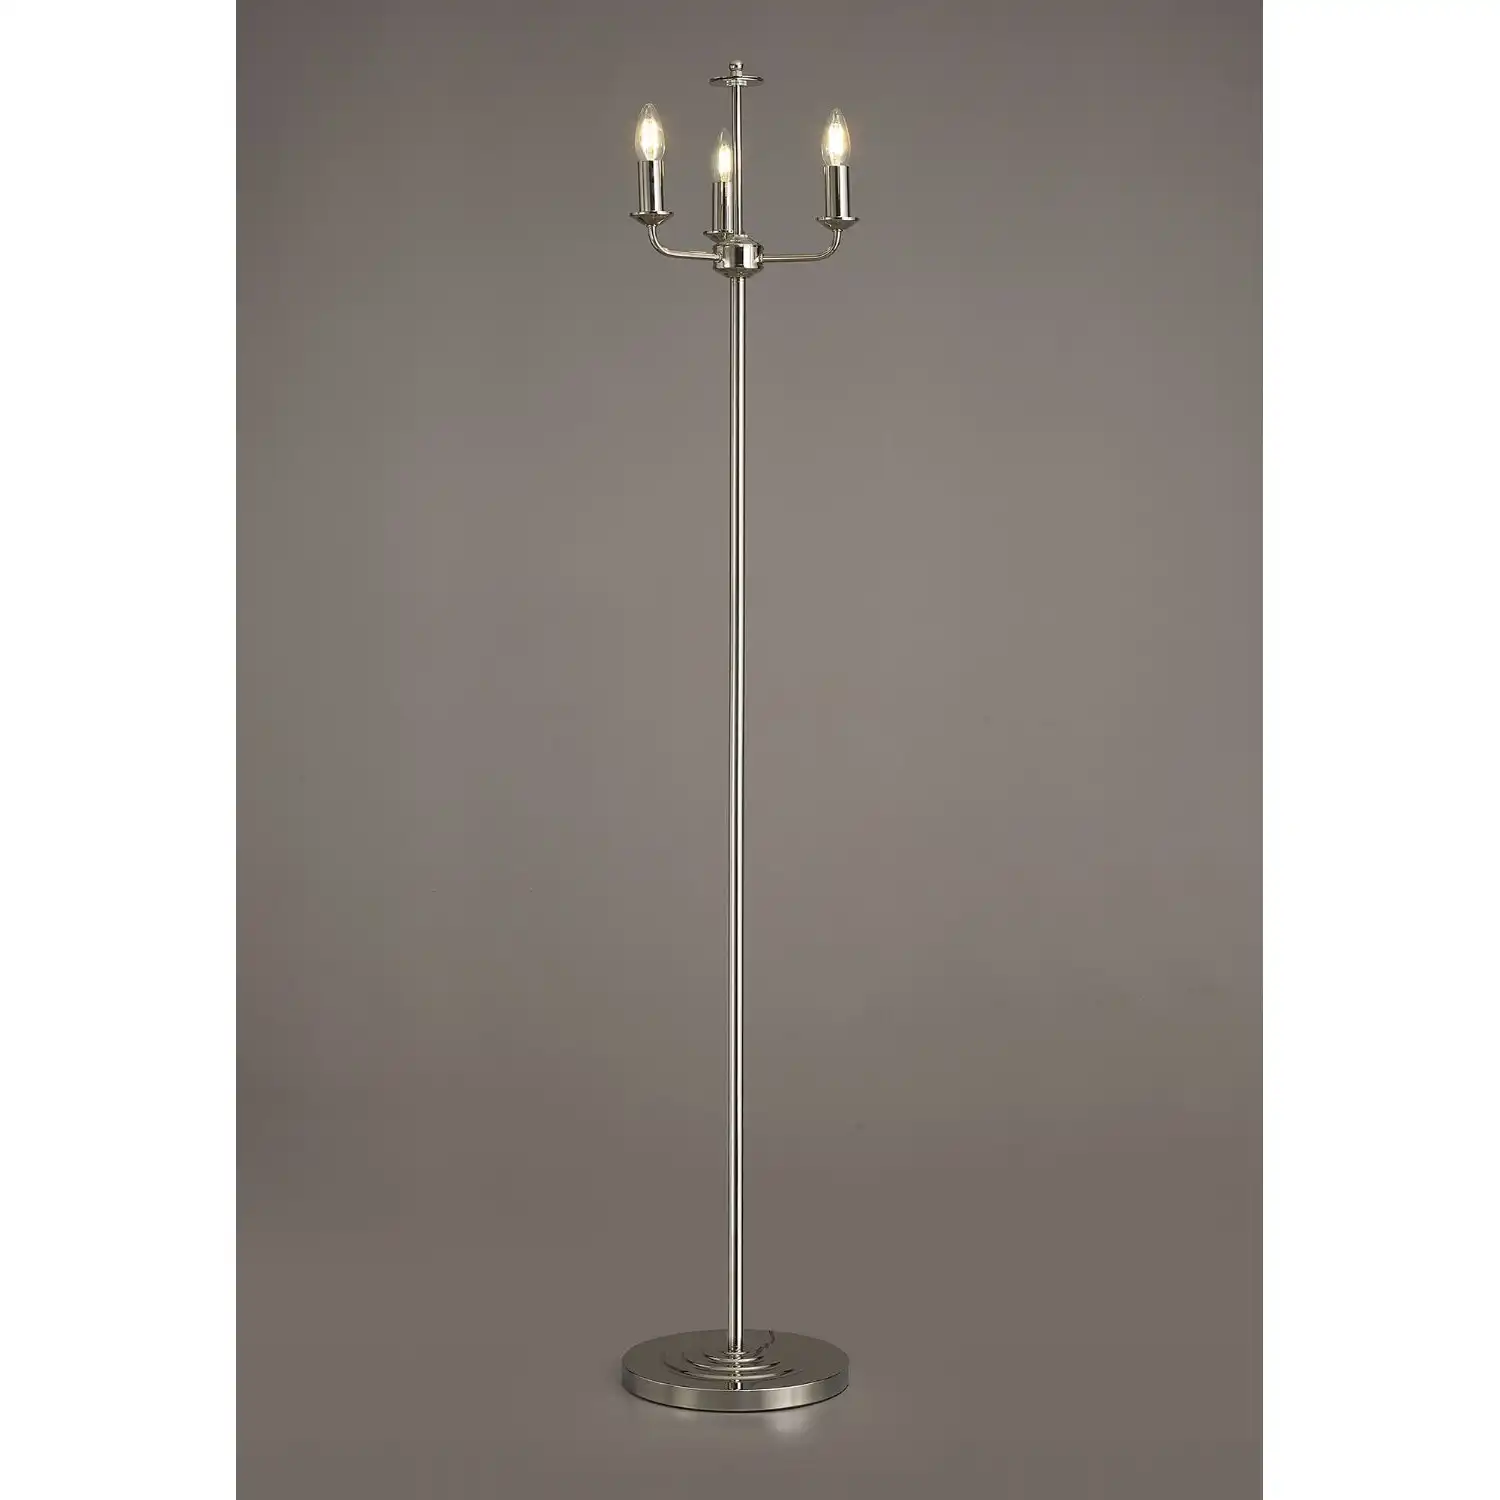 Banyan 3 Light Switched Floor Lamp Without Shade, E14 Polished Nickel